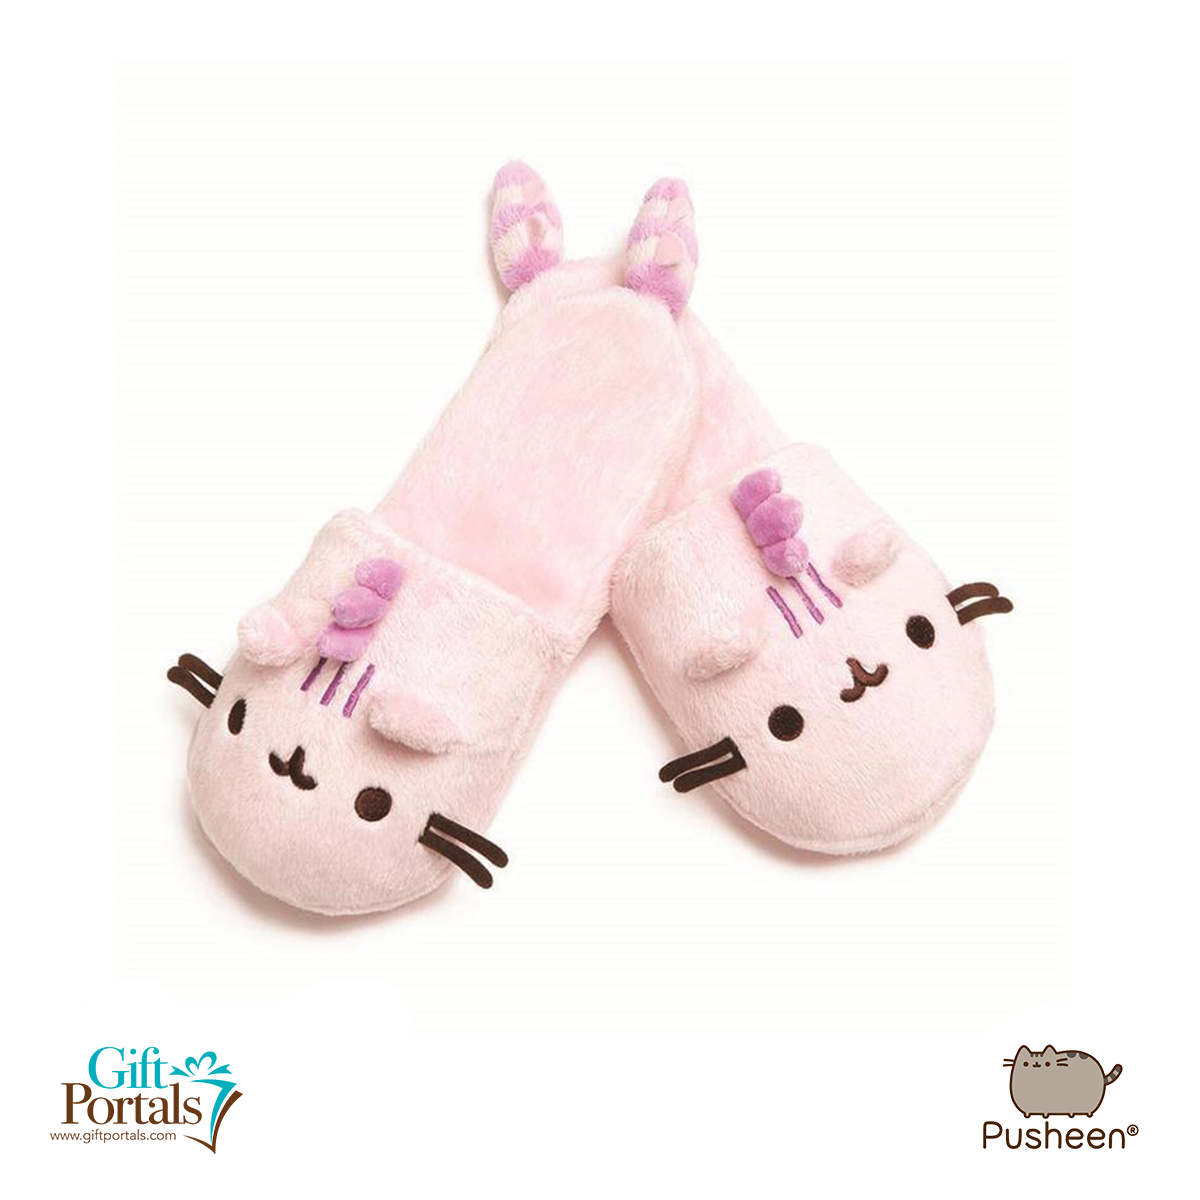 Pusheen Cotton Candy Slippers